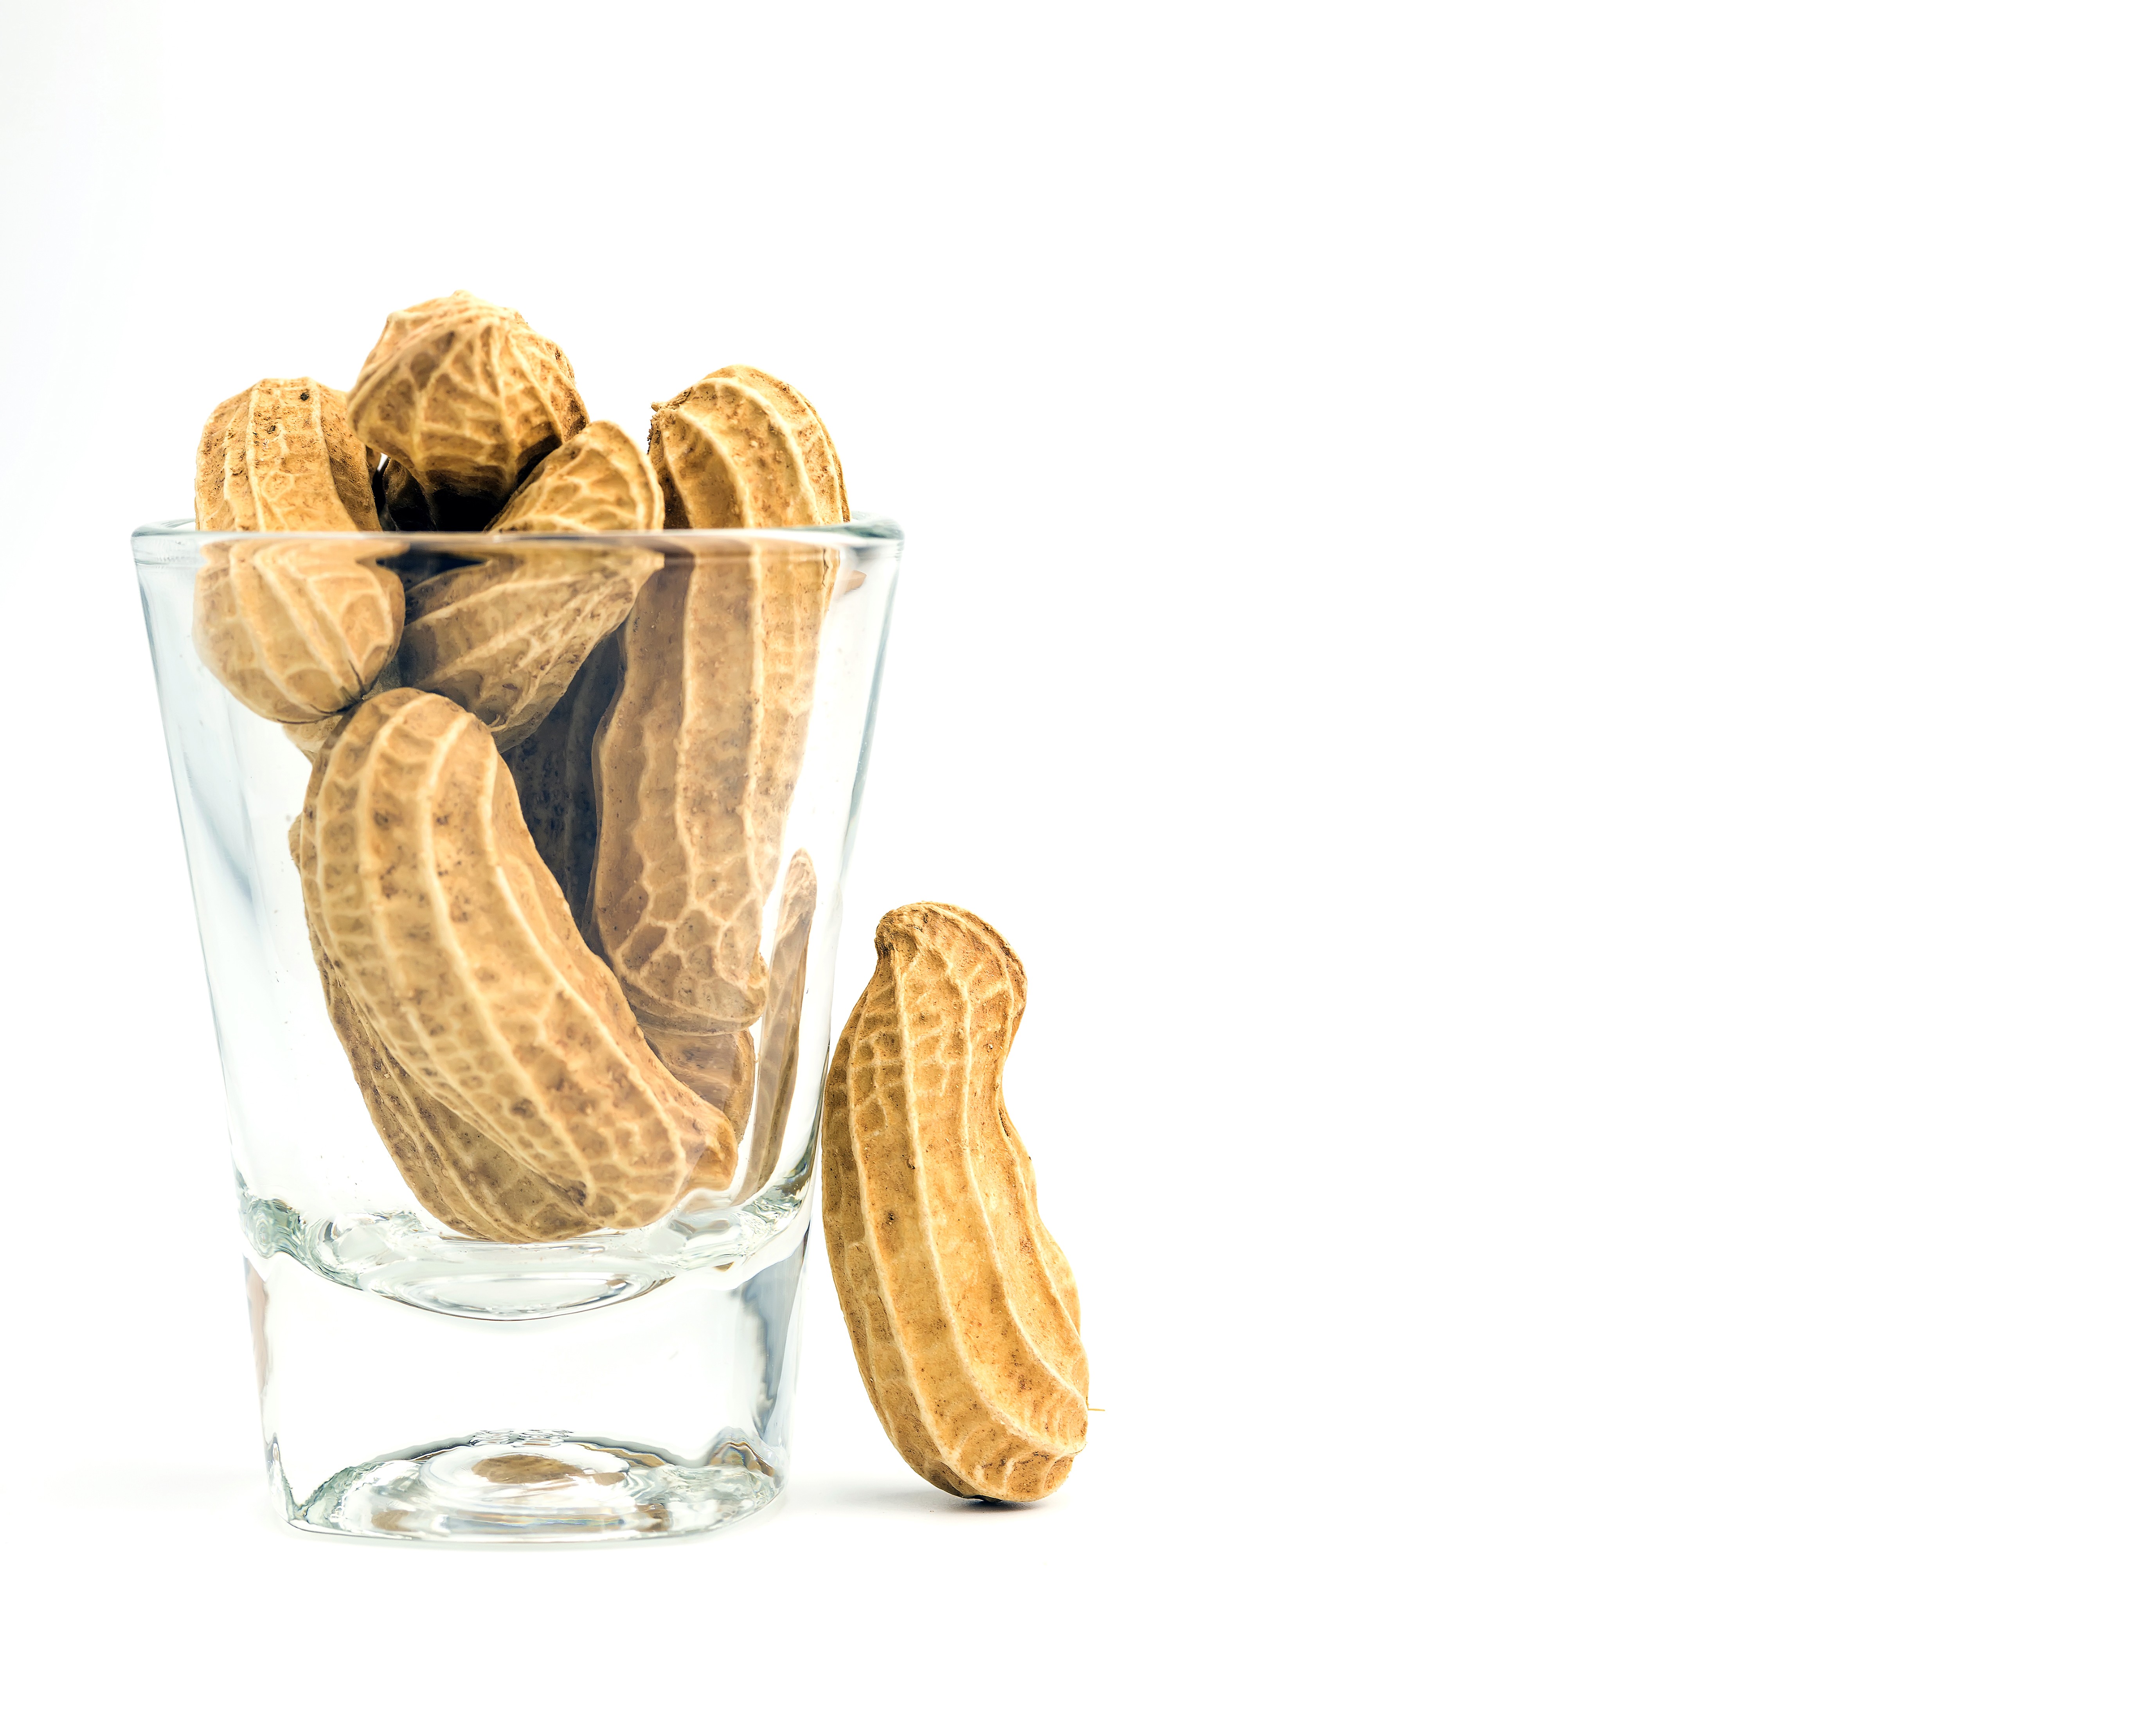 Hong Kong has an estimated 21,000 people suffering from peanut allergy. Photo: Shutterstock